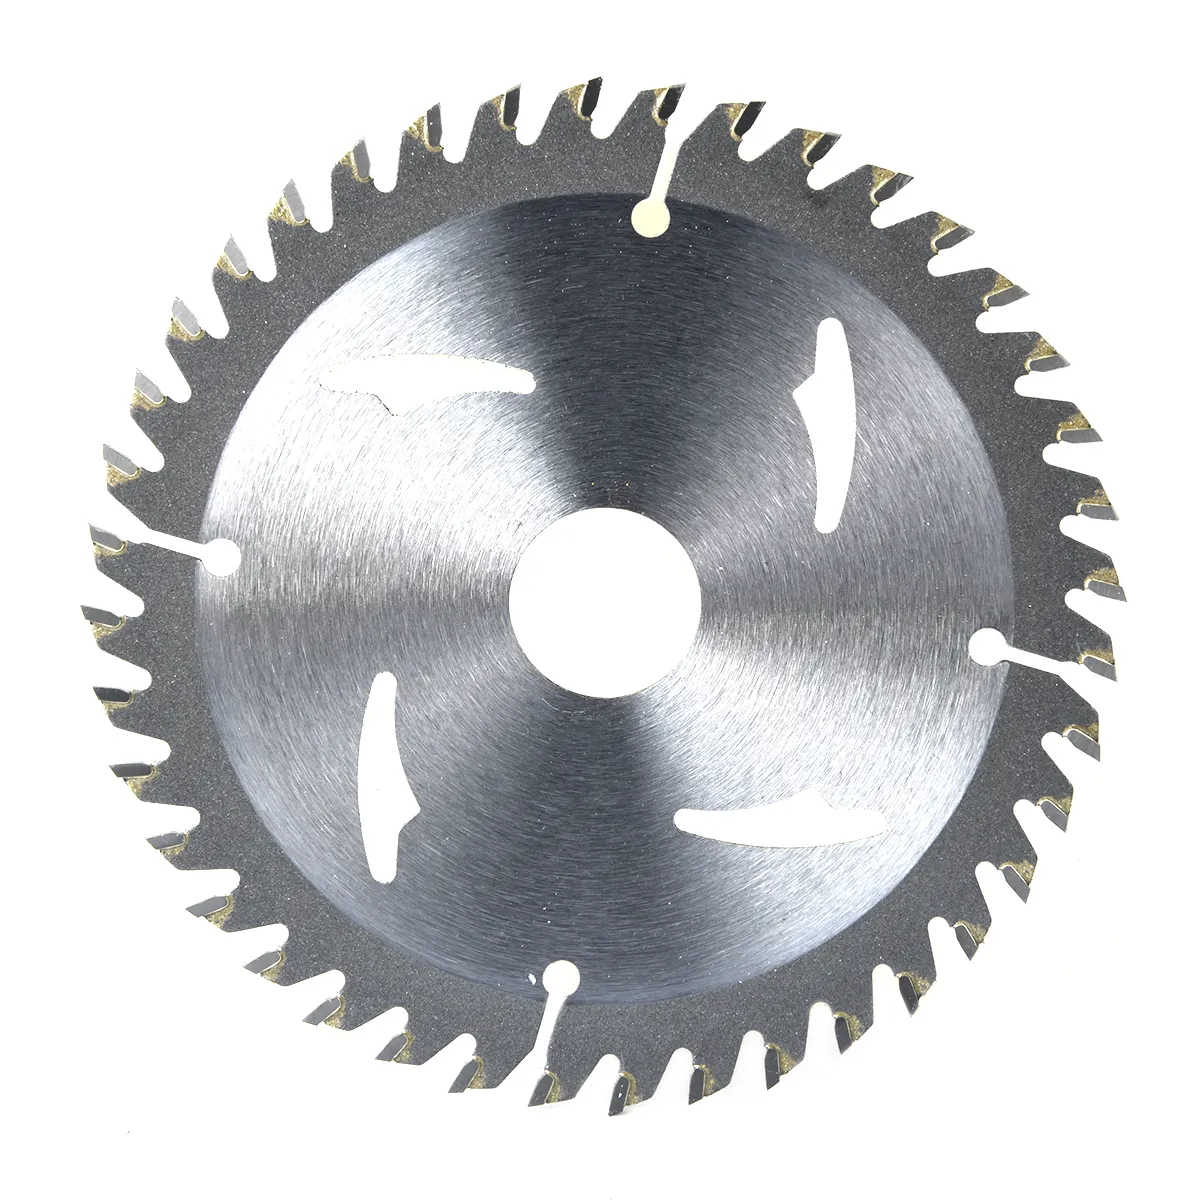 4 Inch 40 Teeth Grinder Ultra Saw Disc Circular Sawing Blade Wood Cutting Round For Woodworking Hand Power Tools Accessories